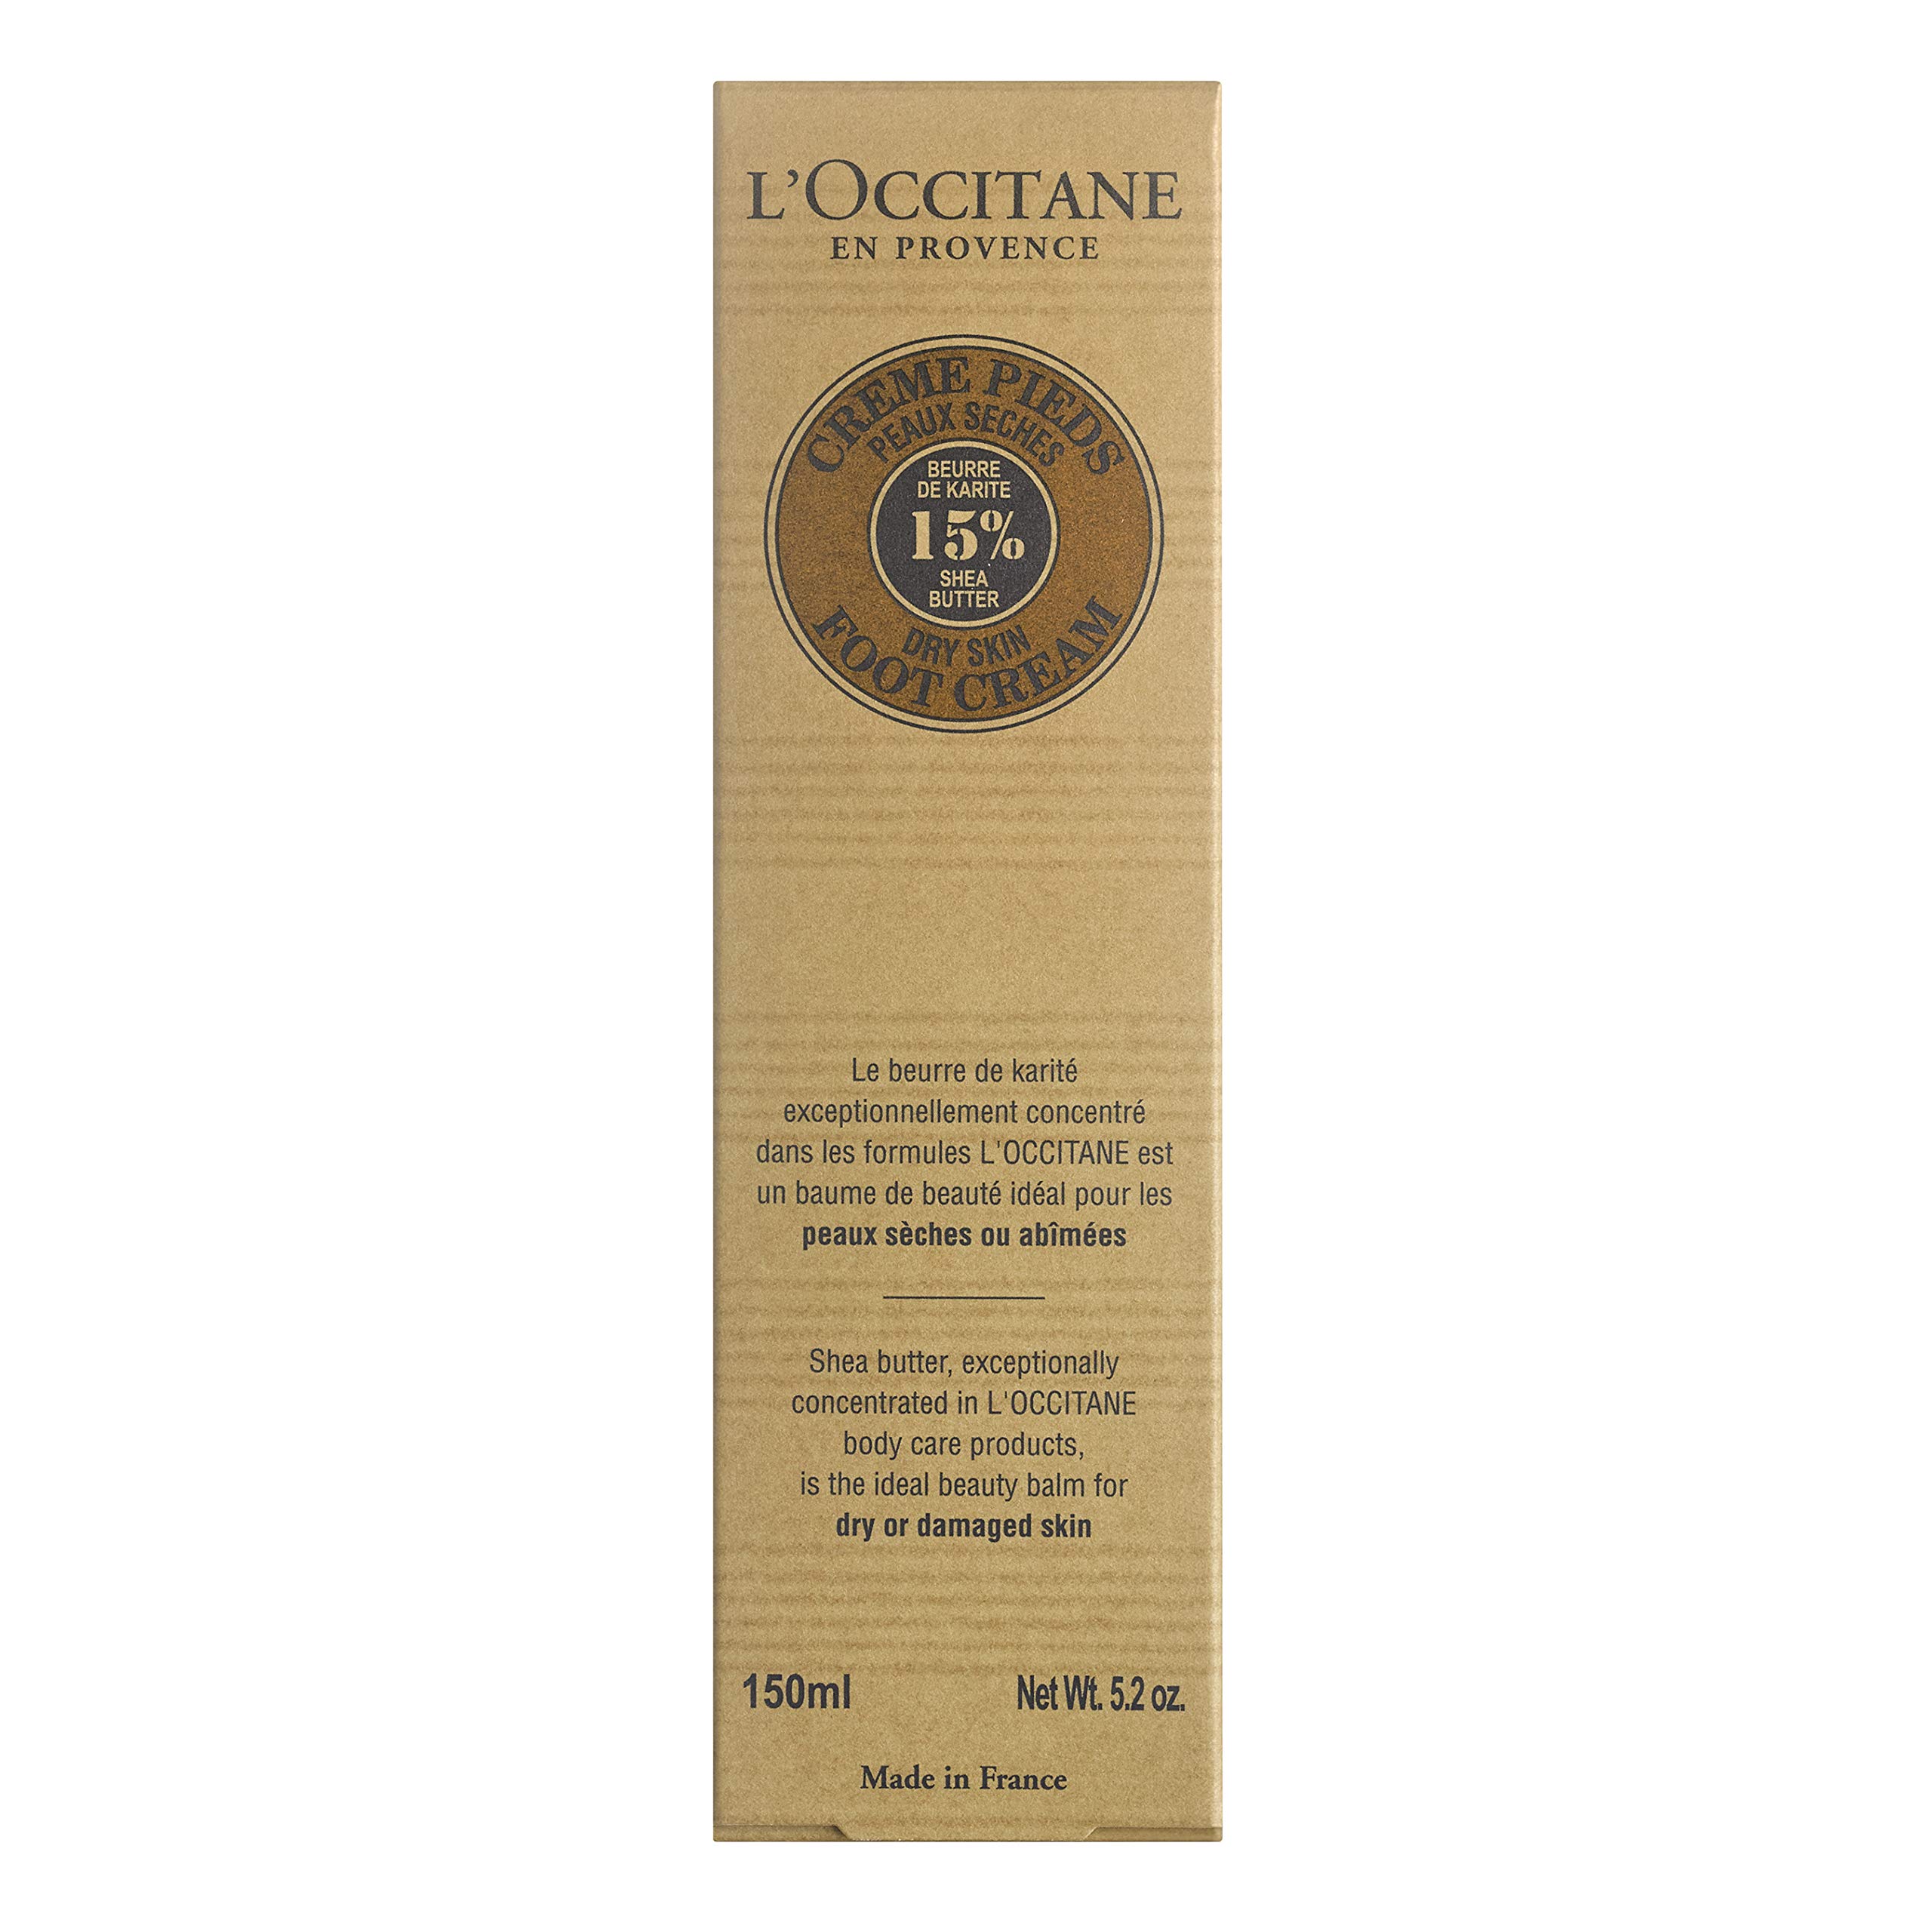 L'Occitane 15% Shea Butter Foot Cream Enriched with Lavender & Arnica, 5.2 Ounce